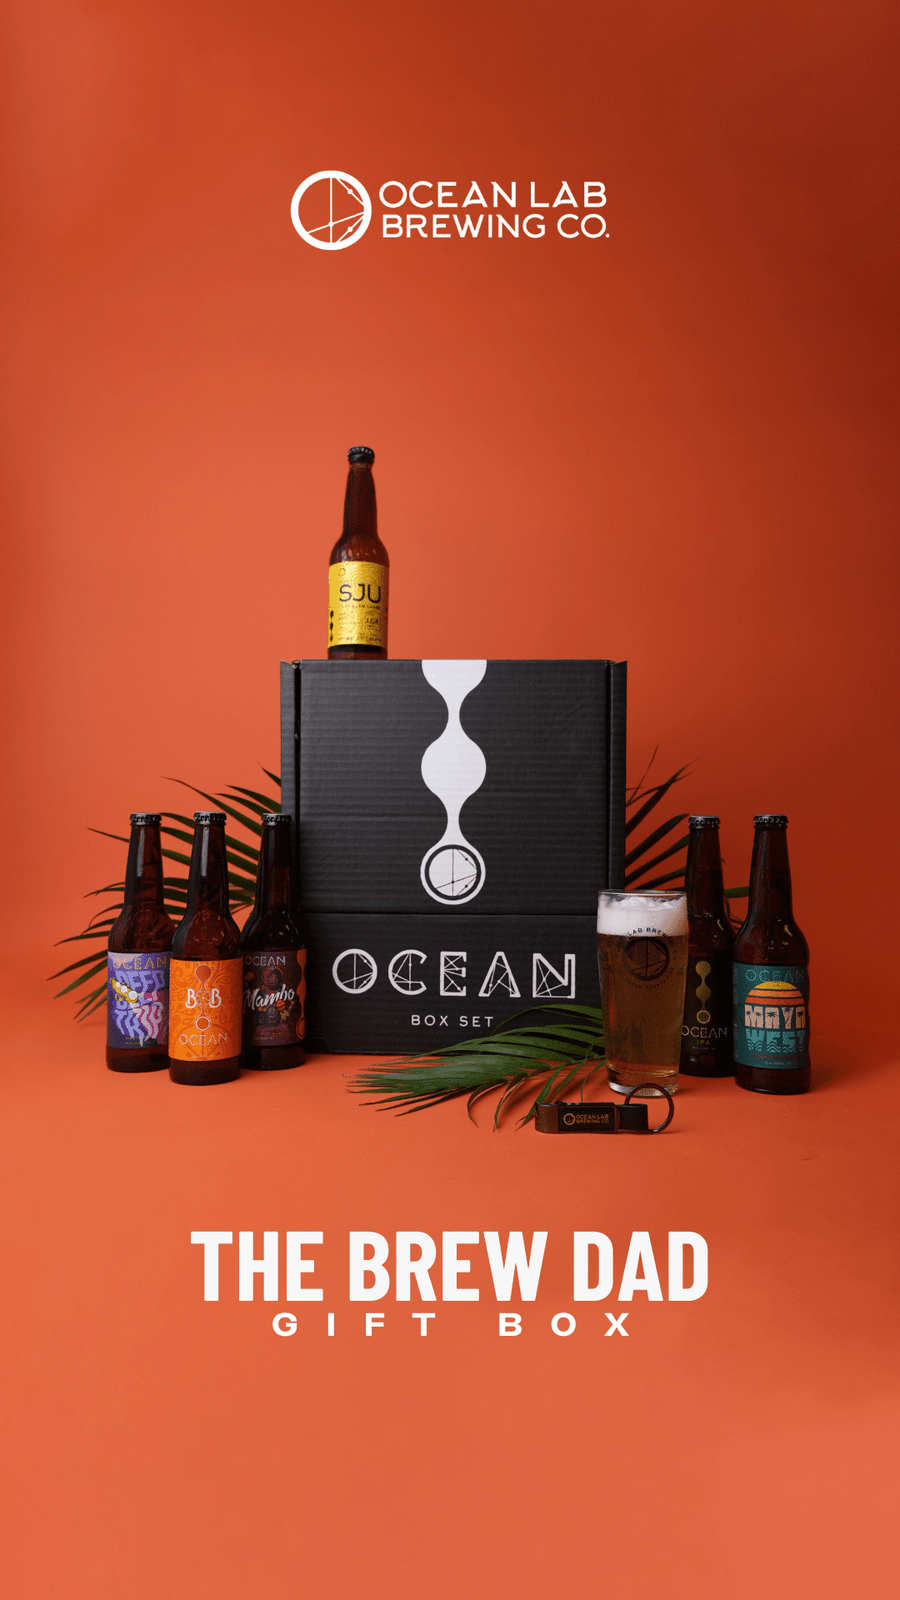 The Brew Dad Gift Box